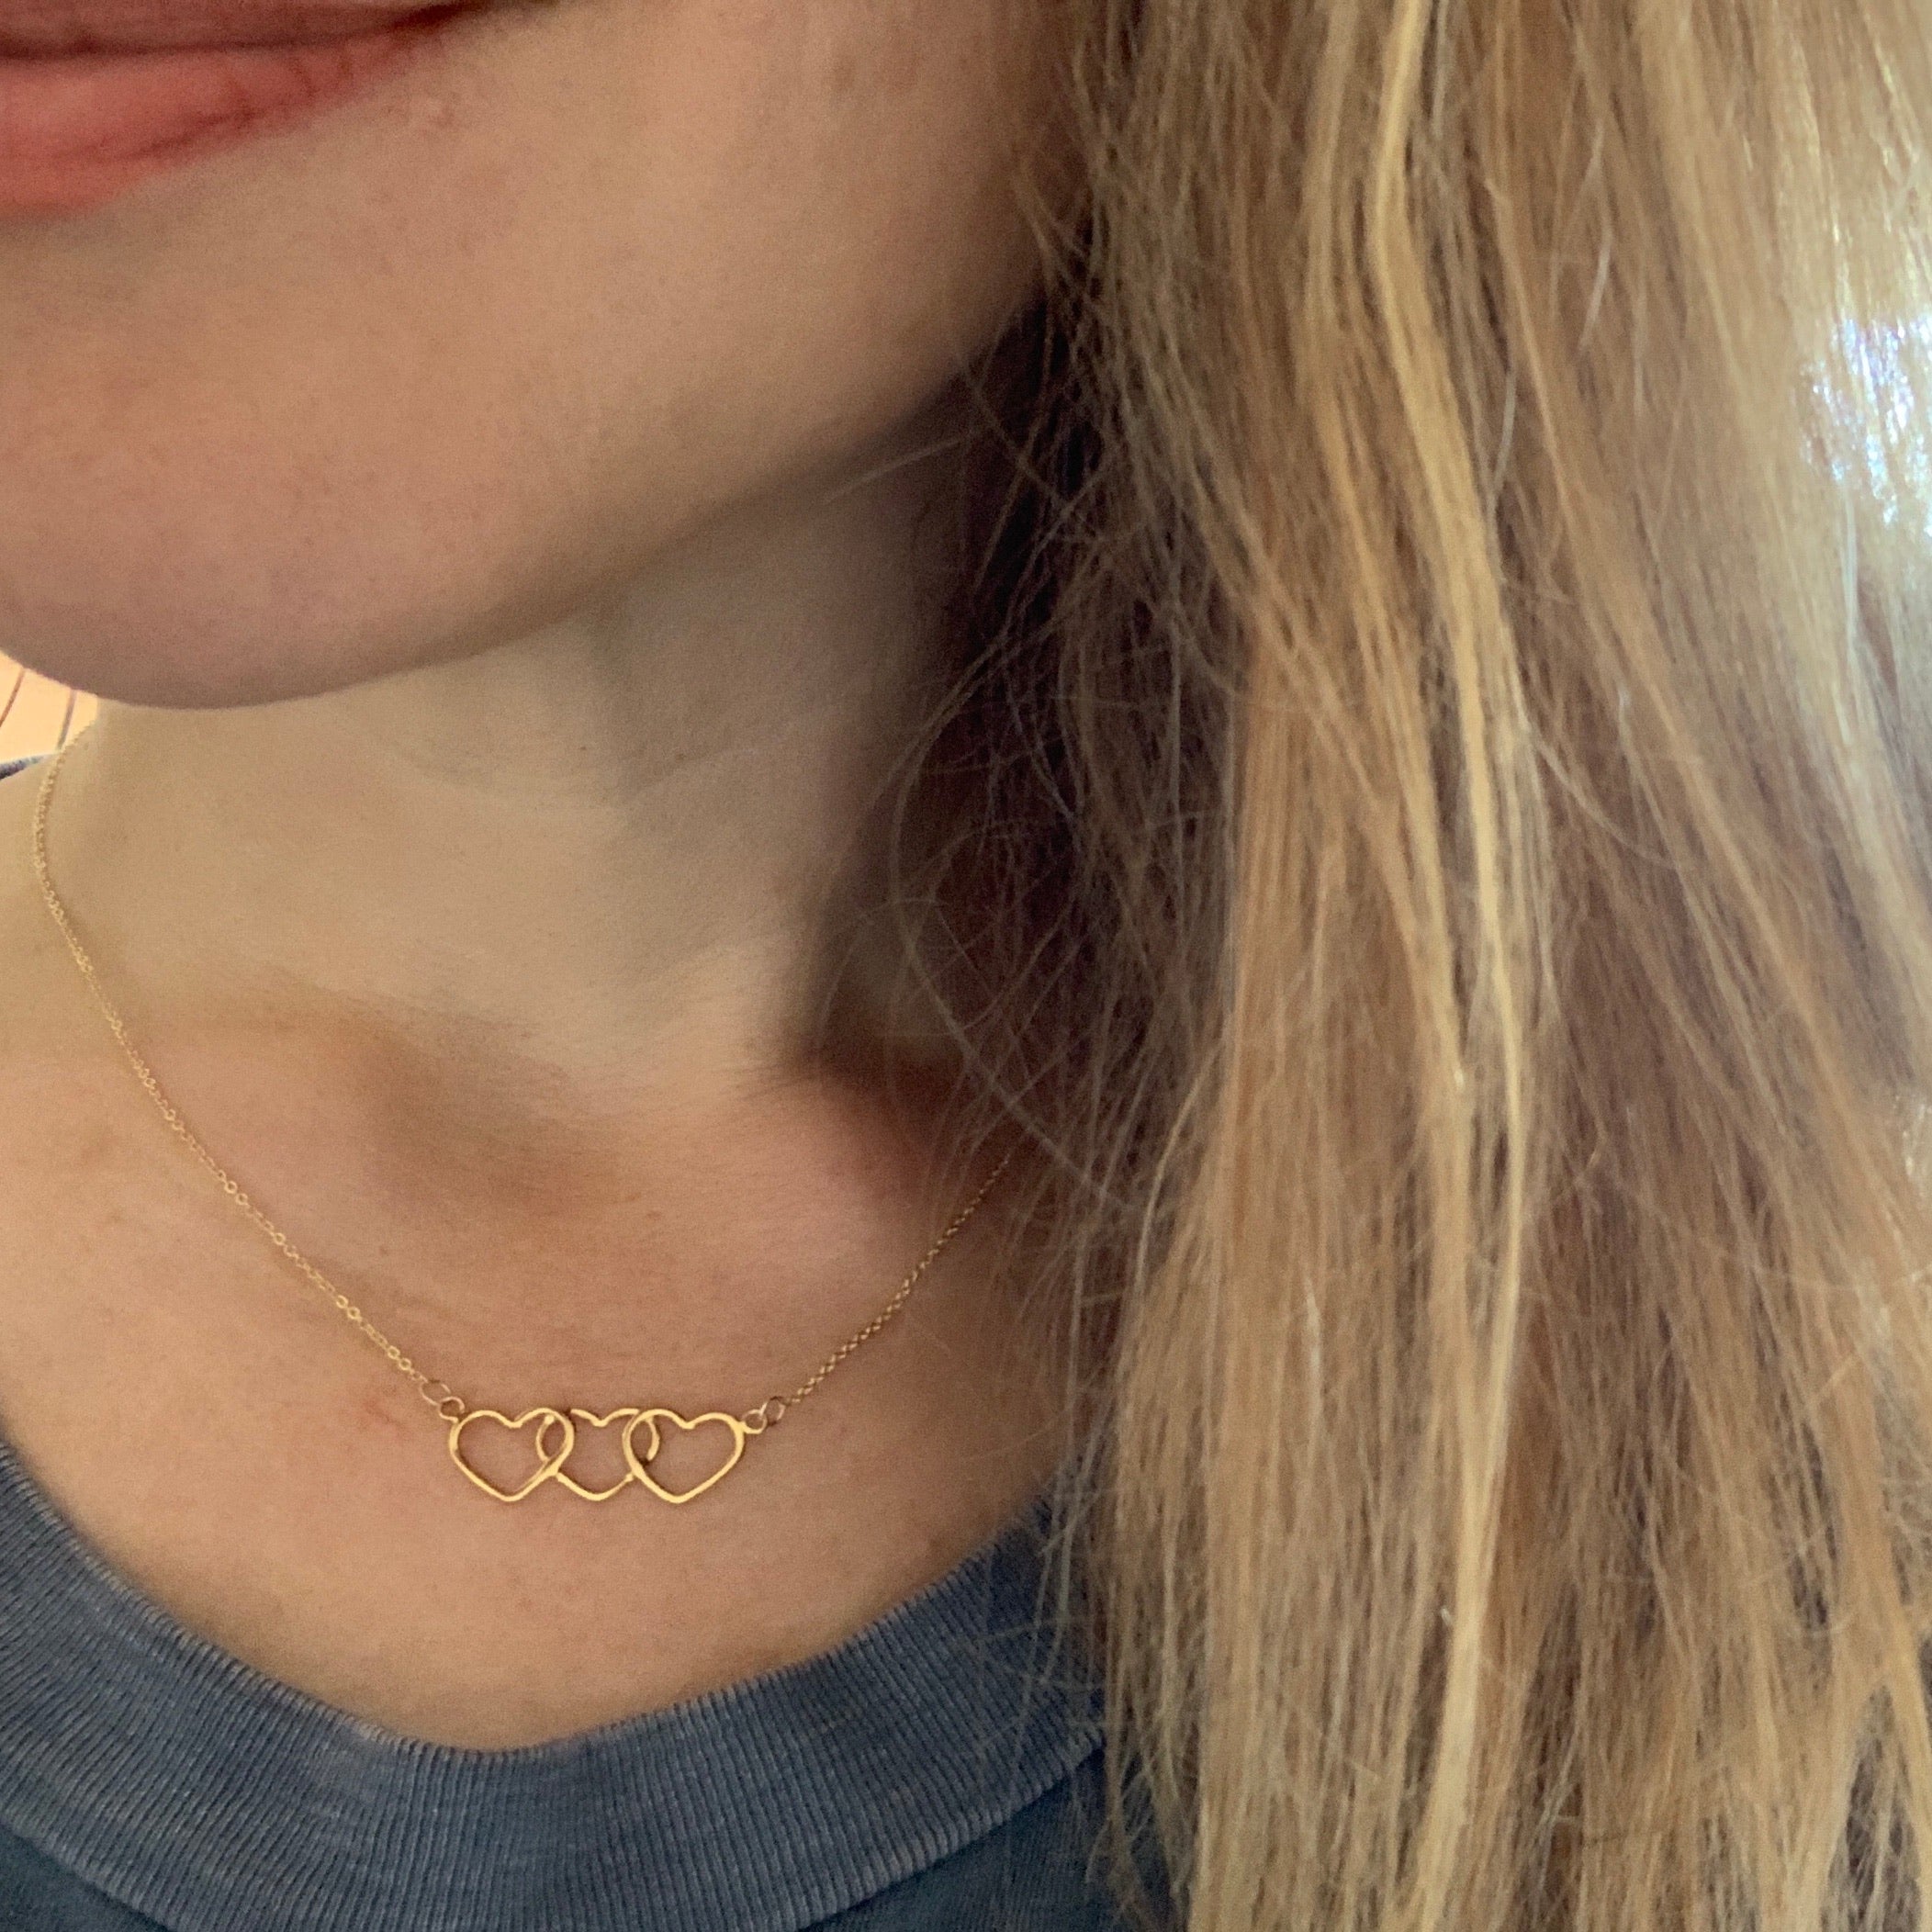 Gold Trinity Necklace, shown on model